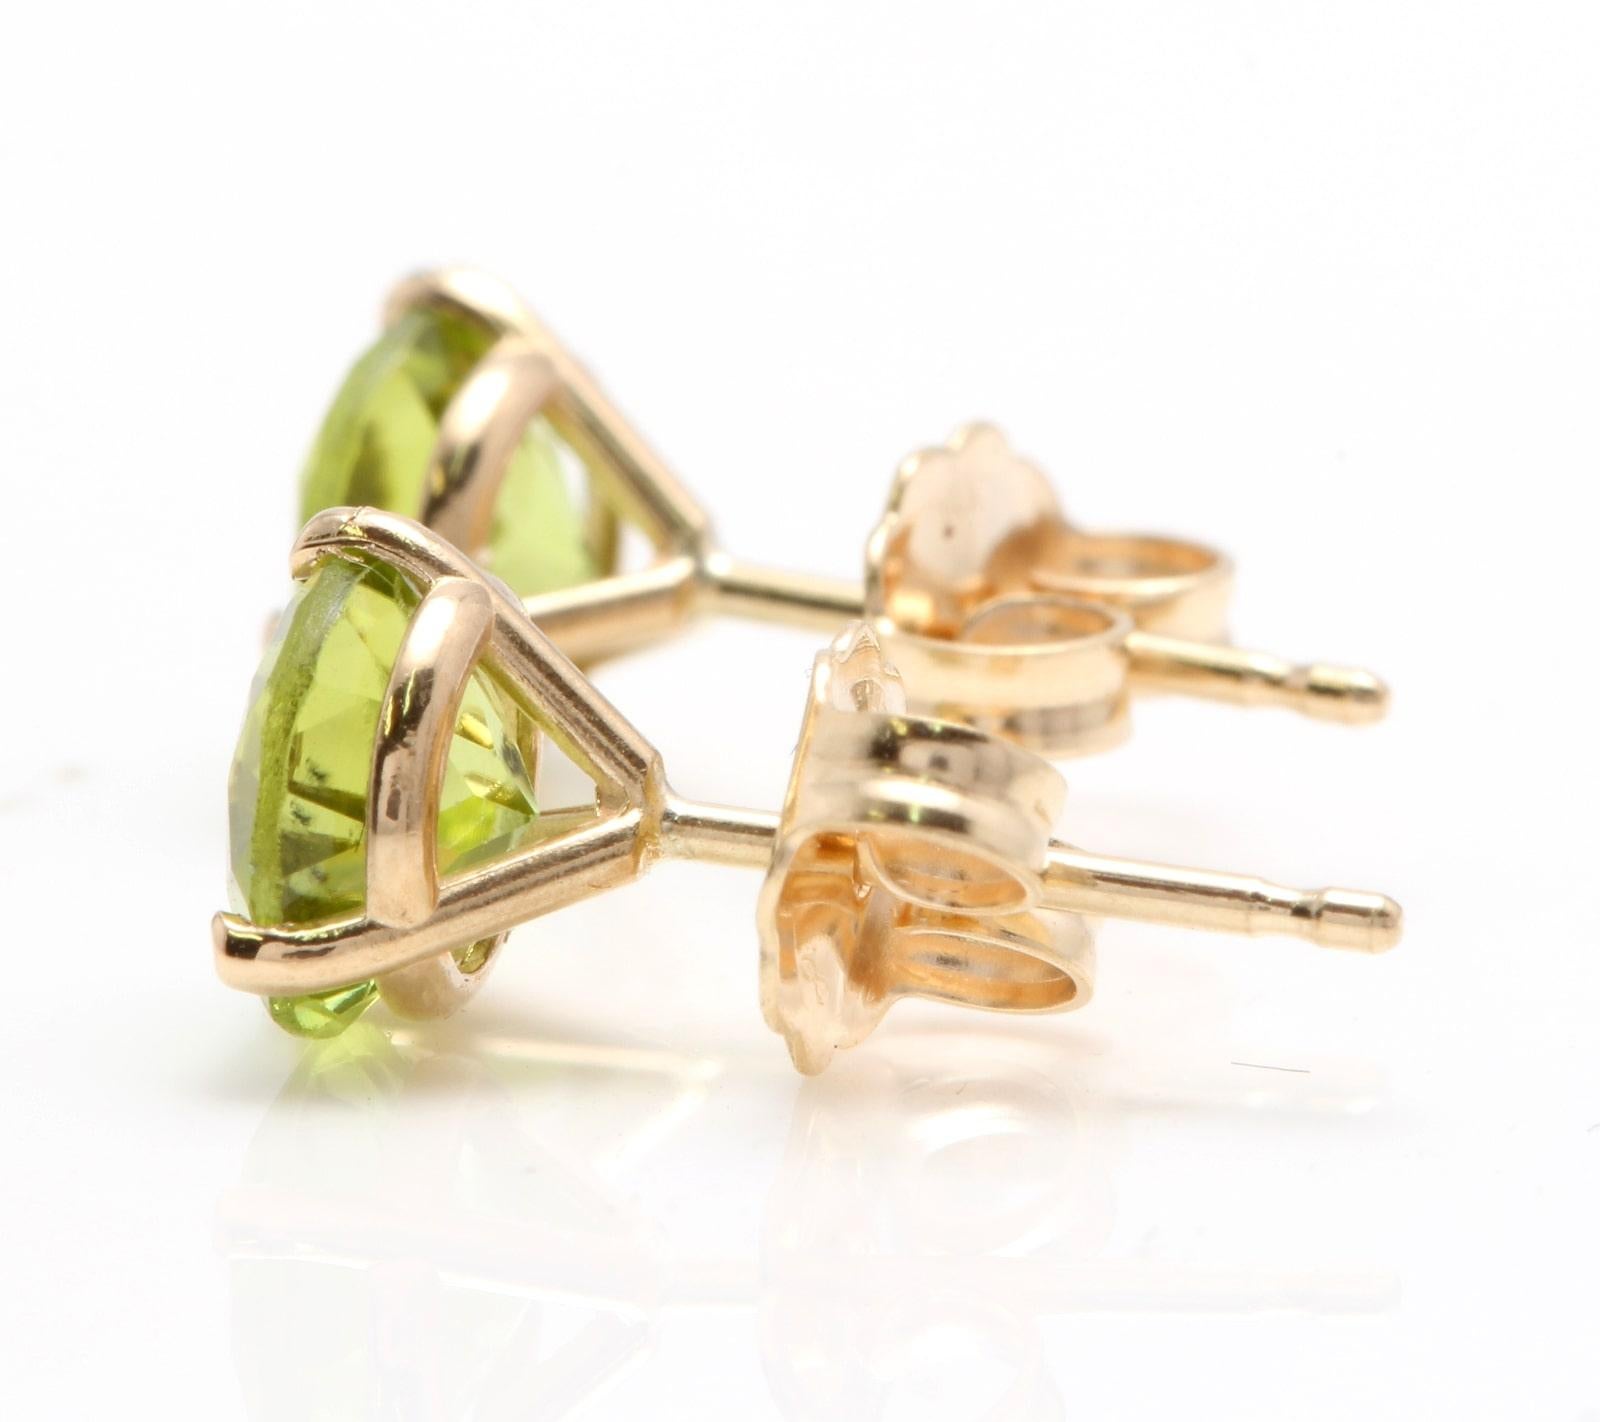 Exquisite 1.80 Carats Natural Peridot 14K Solid Yellow Gold Martini Stud Earrings

Amazing looking piece!

Total Natural Round Cut Green Peridot Weight: 1.80 Carats (both earrings)

Peridot Measures: 6mm

Total Earrings Weight is: 1.1